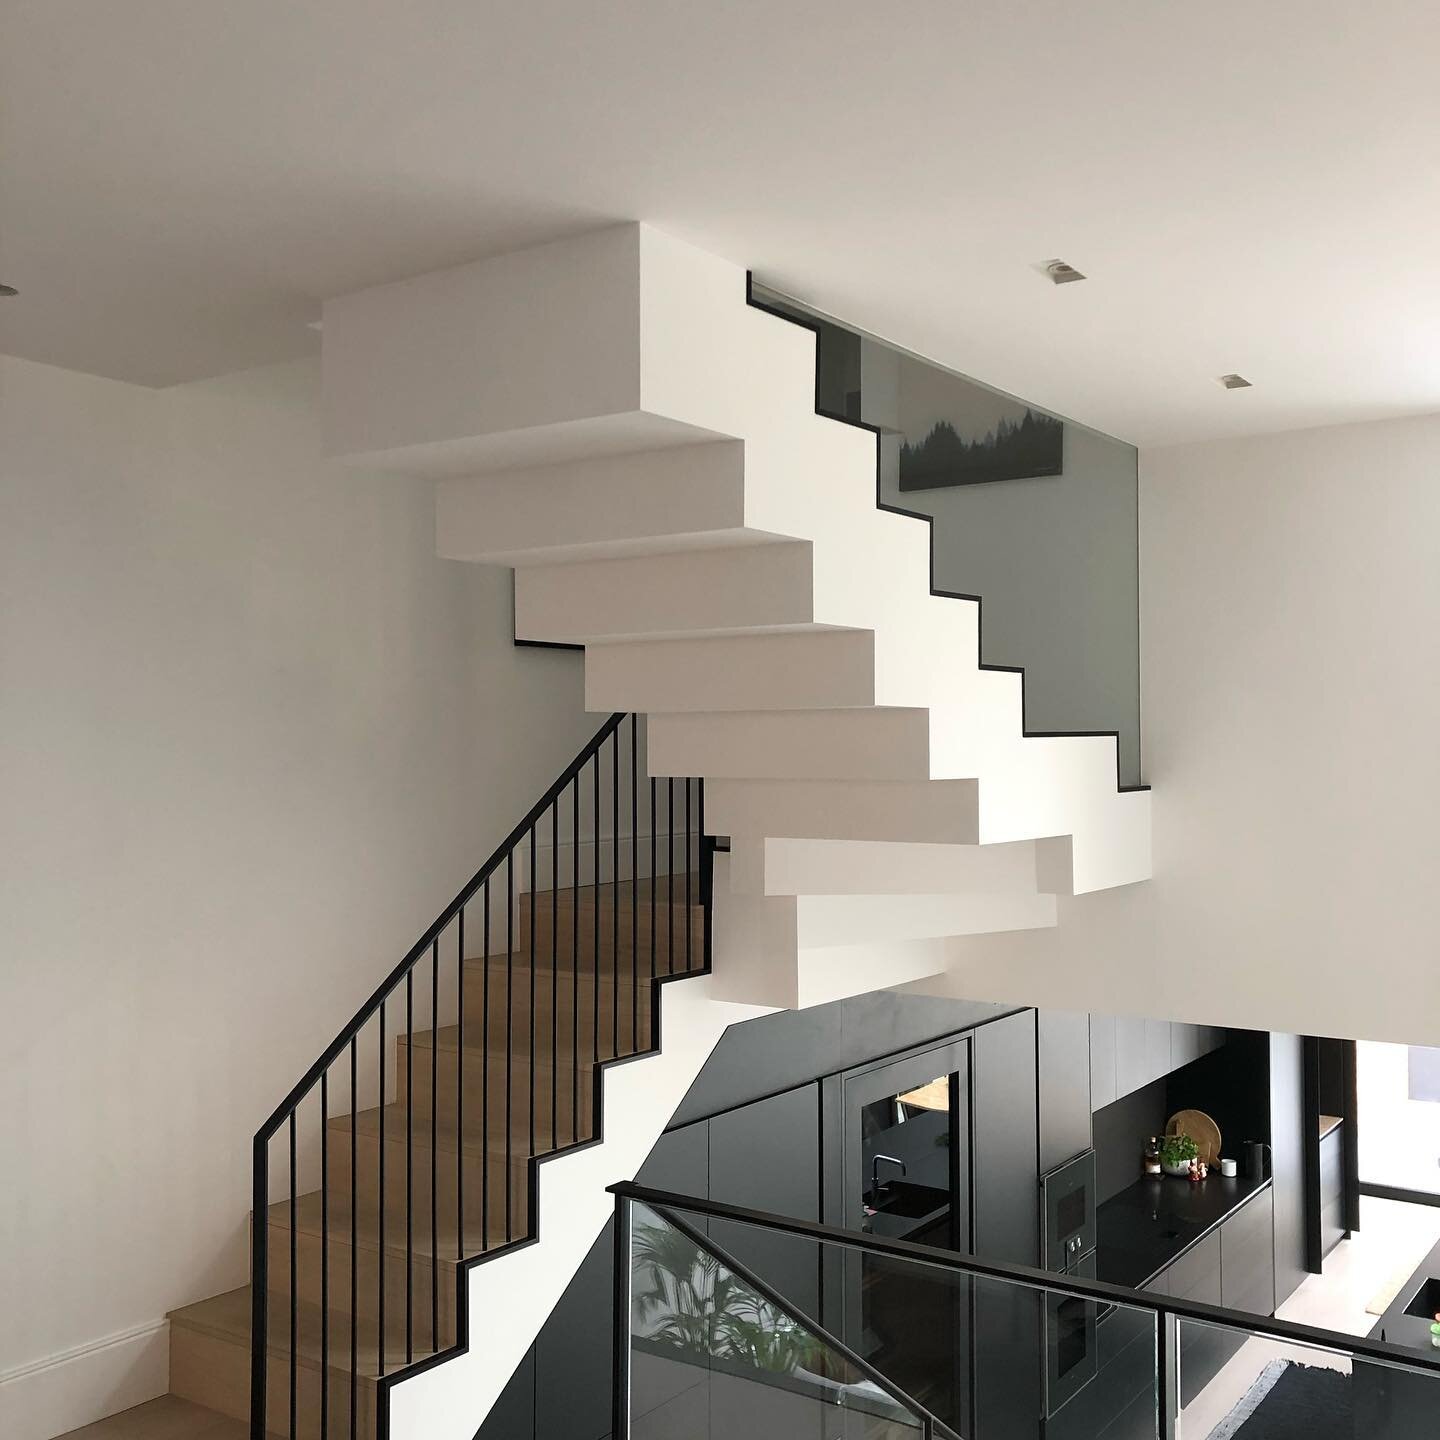 One of the completed projects by us  in Fulham.
Beautiful bespoke staircase design  credits to @jo_cowen_architects_ 
@kanddjoinery 
#bespoke#staircase #houserenovation #modernprojects #metalbalustrade #glass #stairsdesign #atentiontodetail #Fulham#f